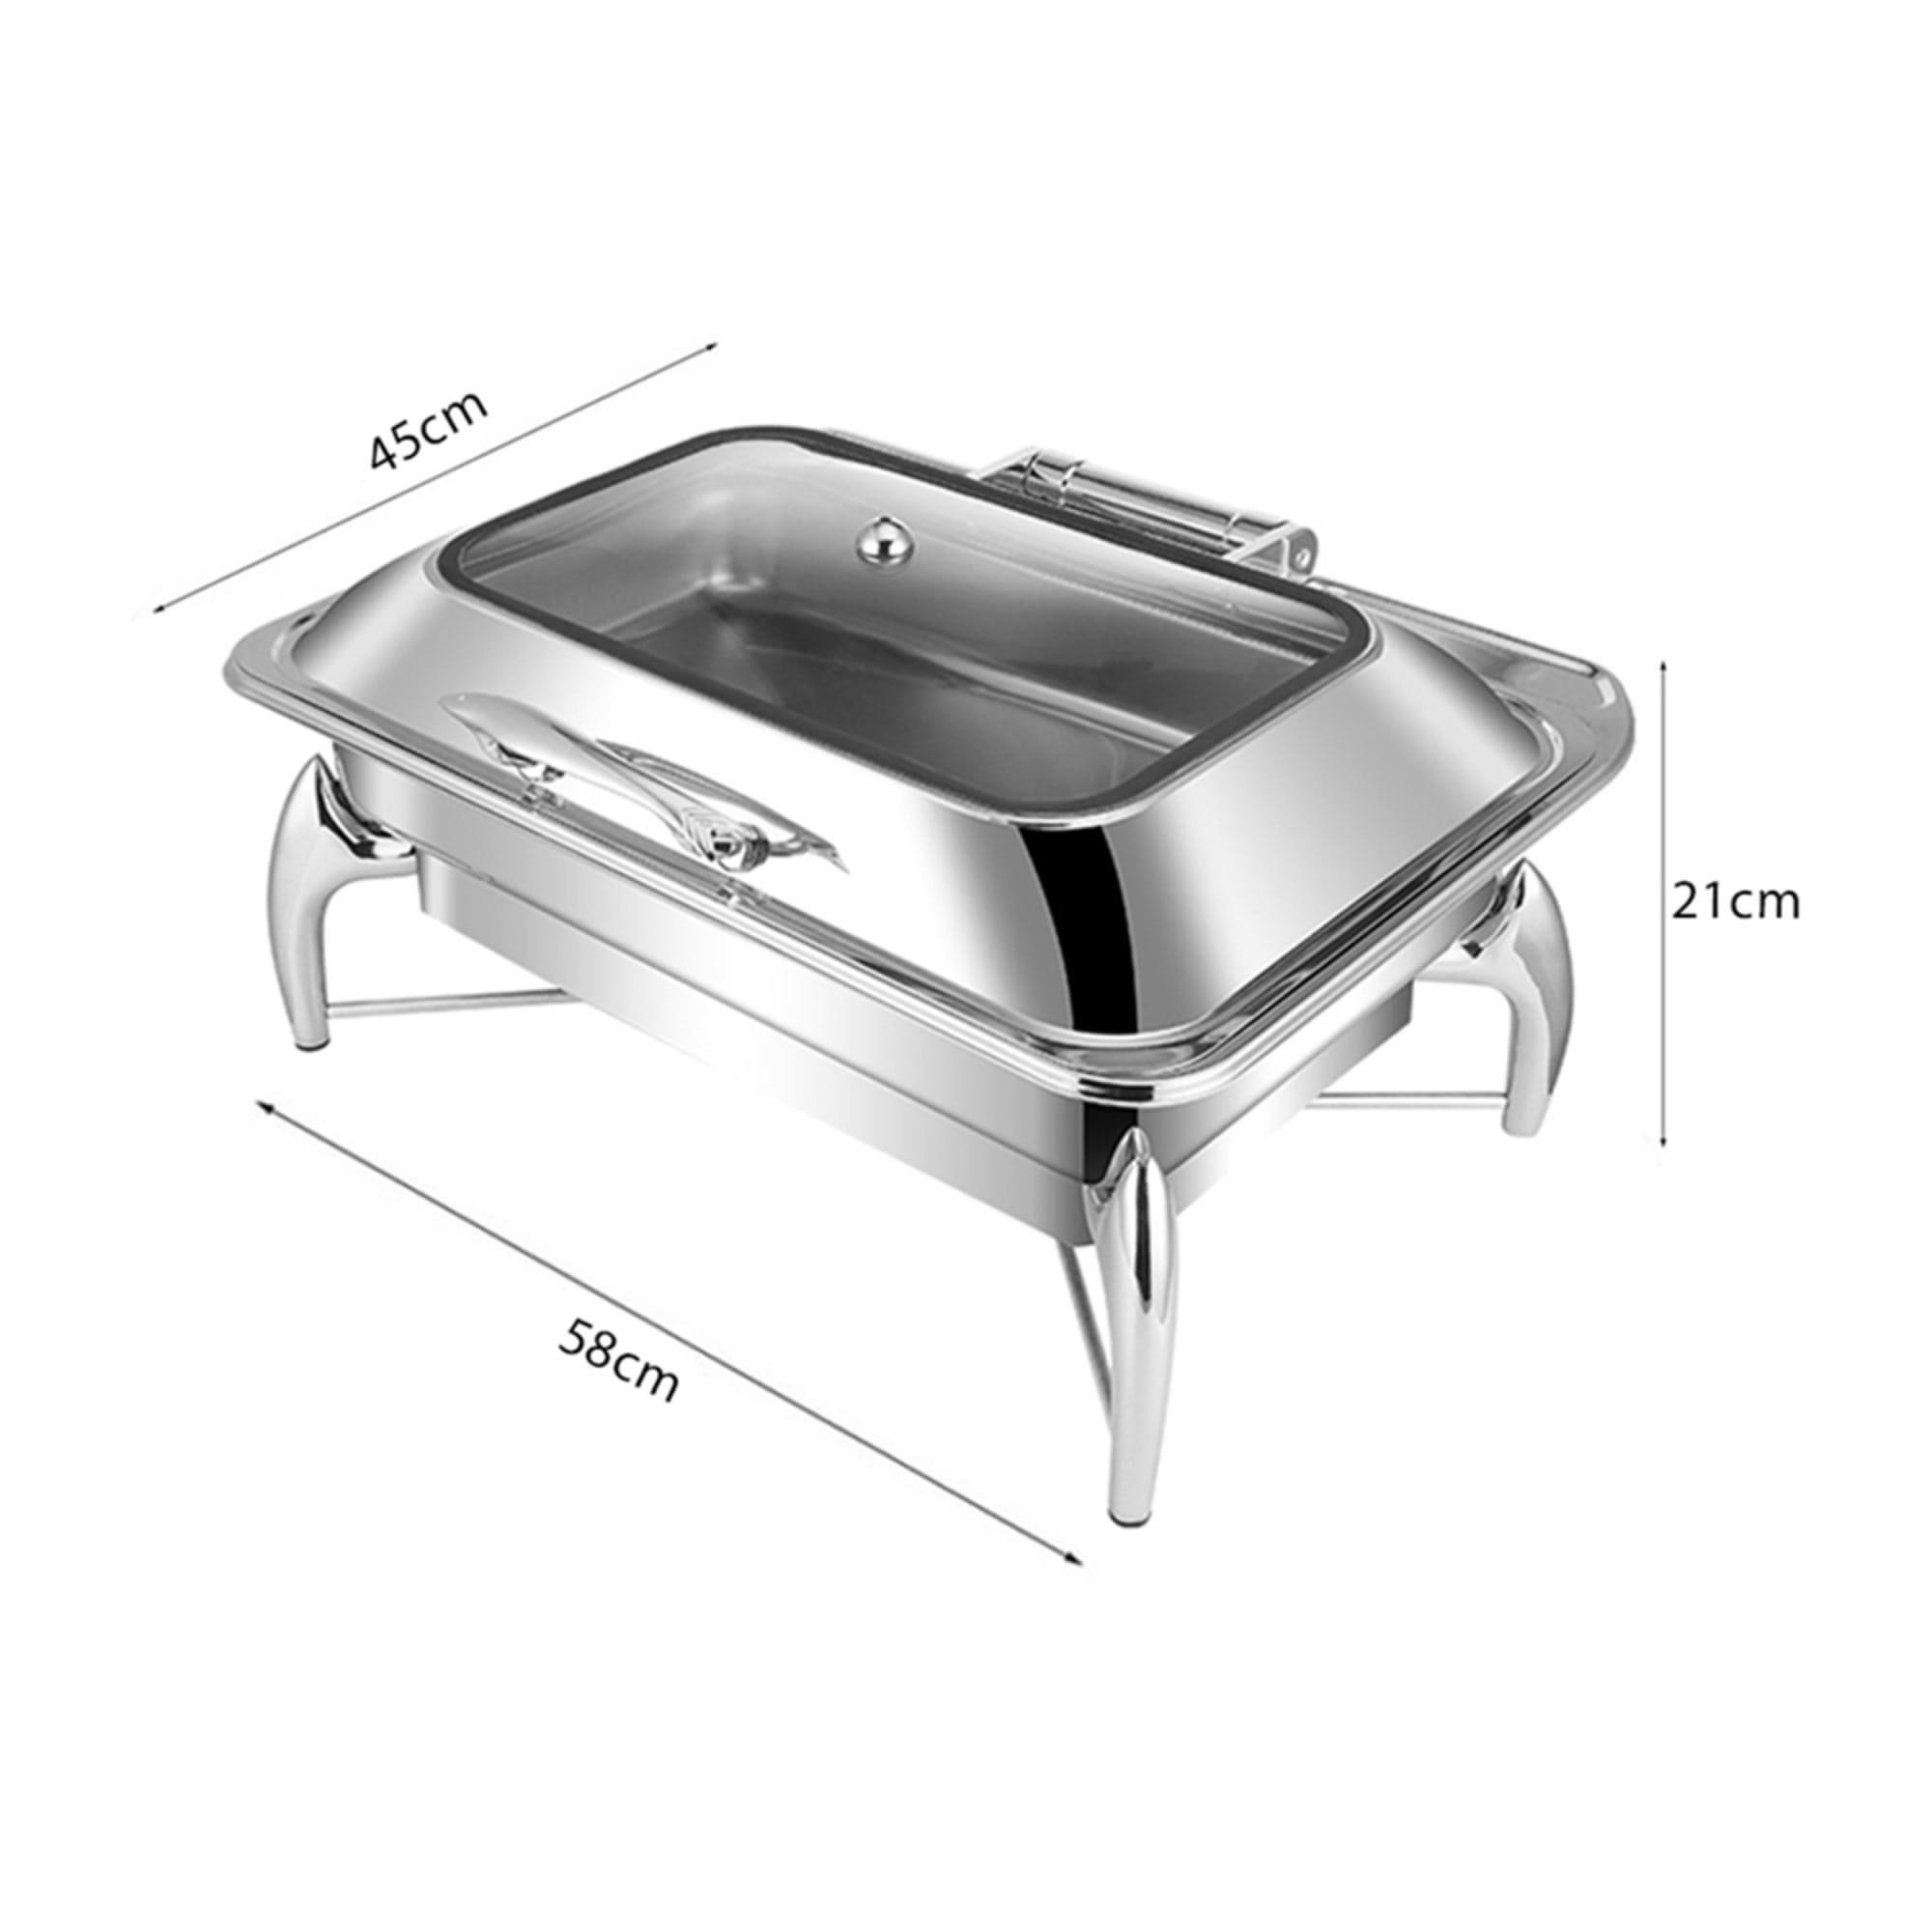 Soga Rectangular Stainless Steel Chafing Dish with Top Lid Set of 2 Image 8